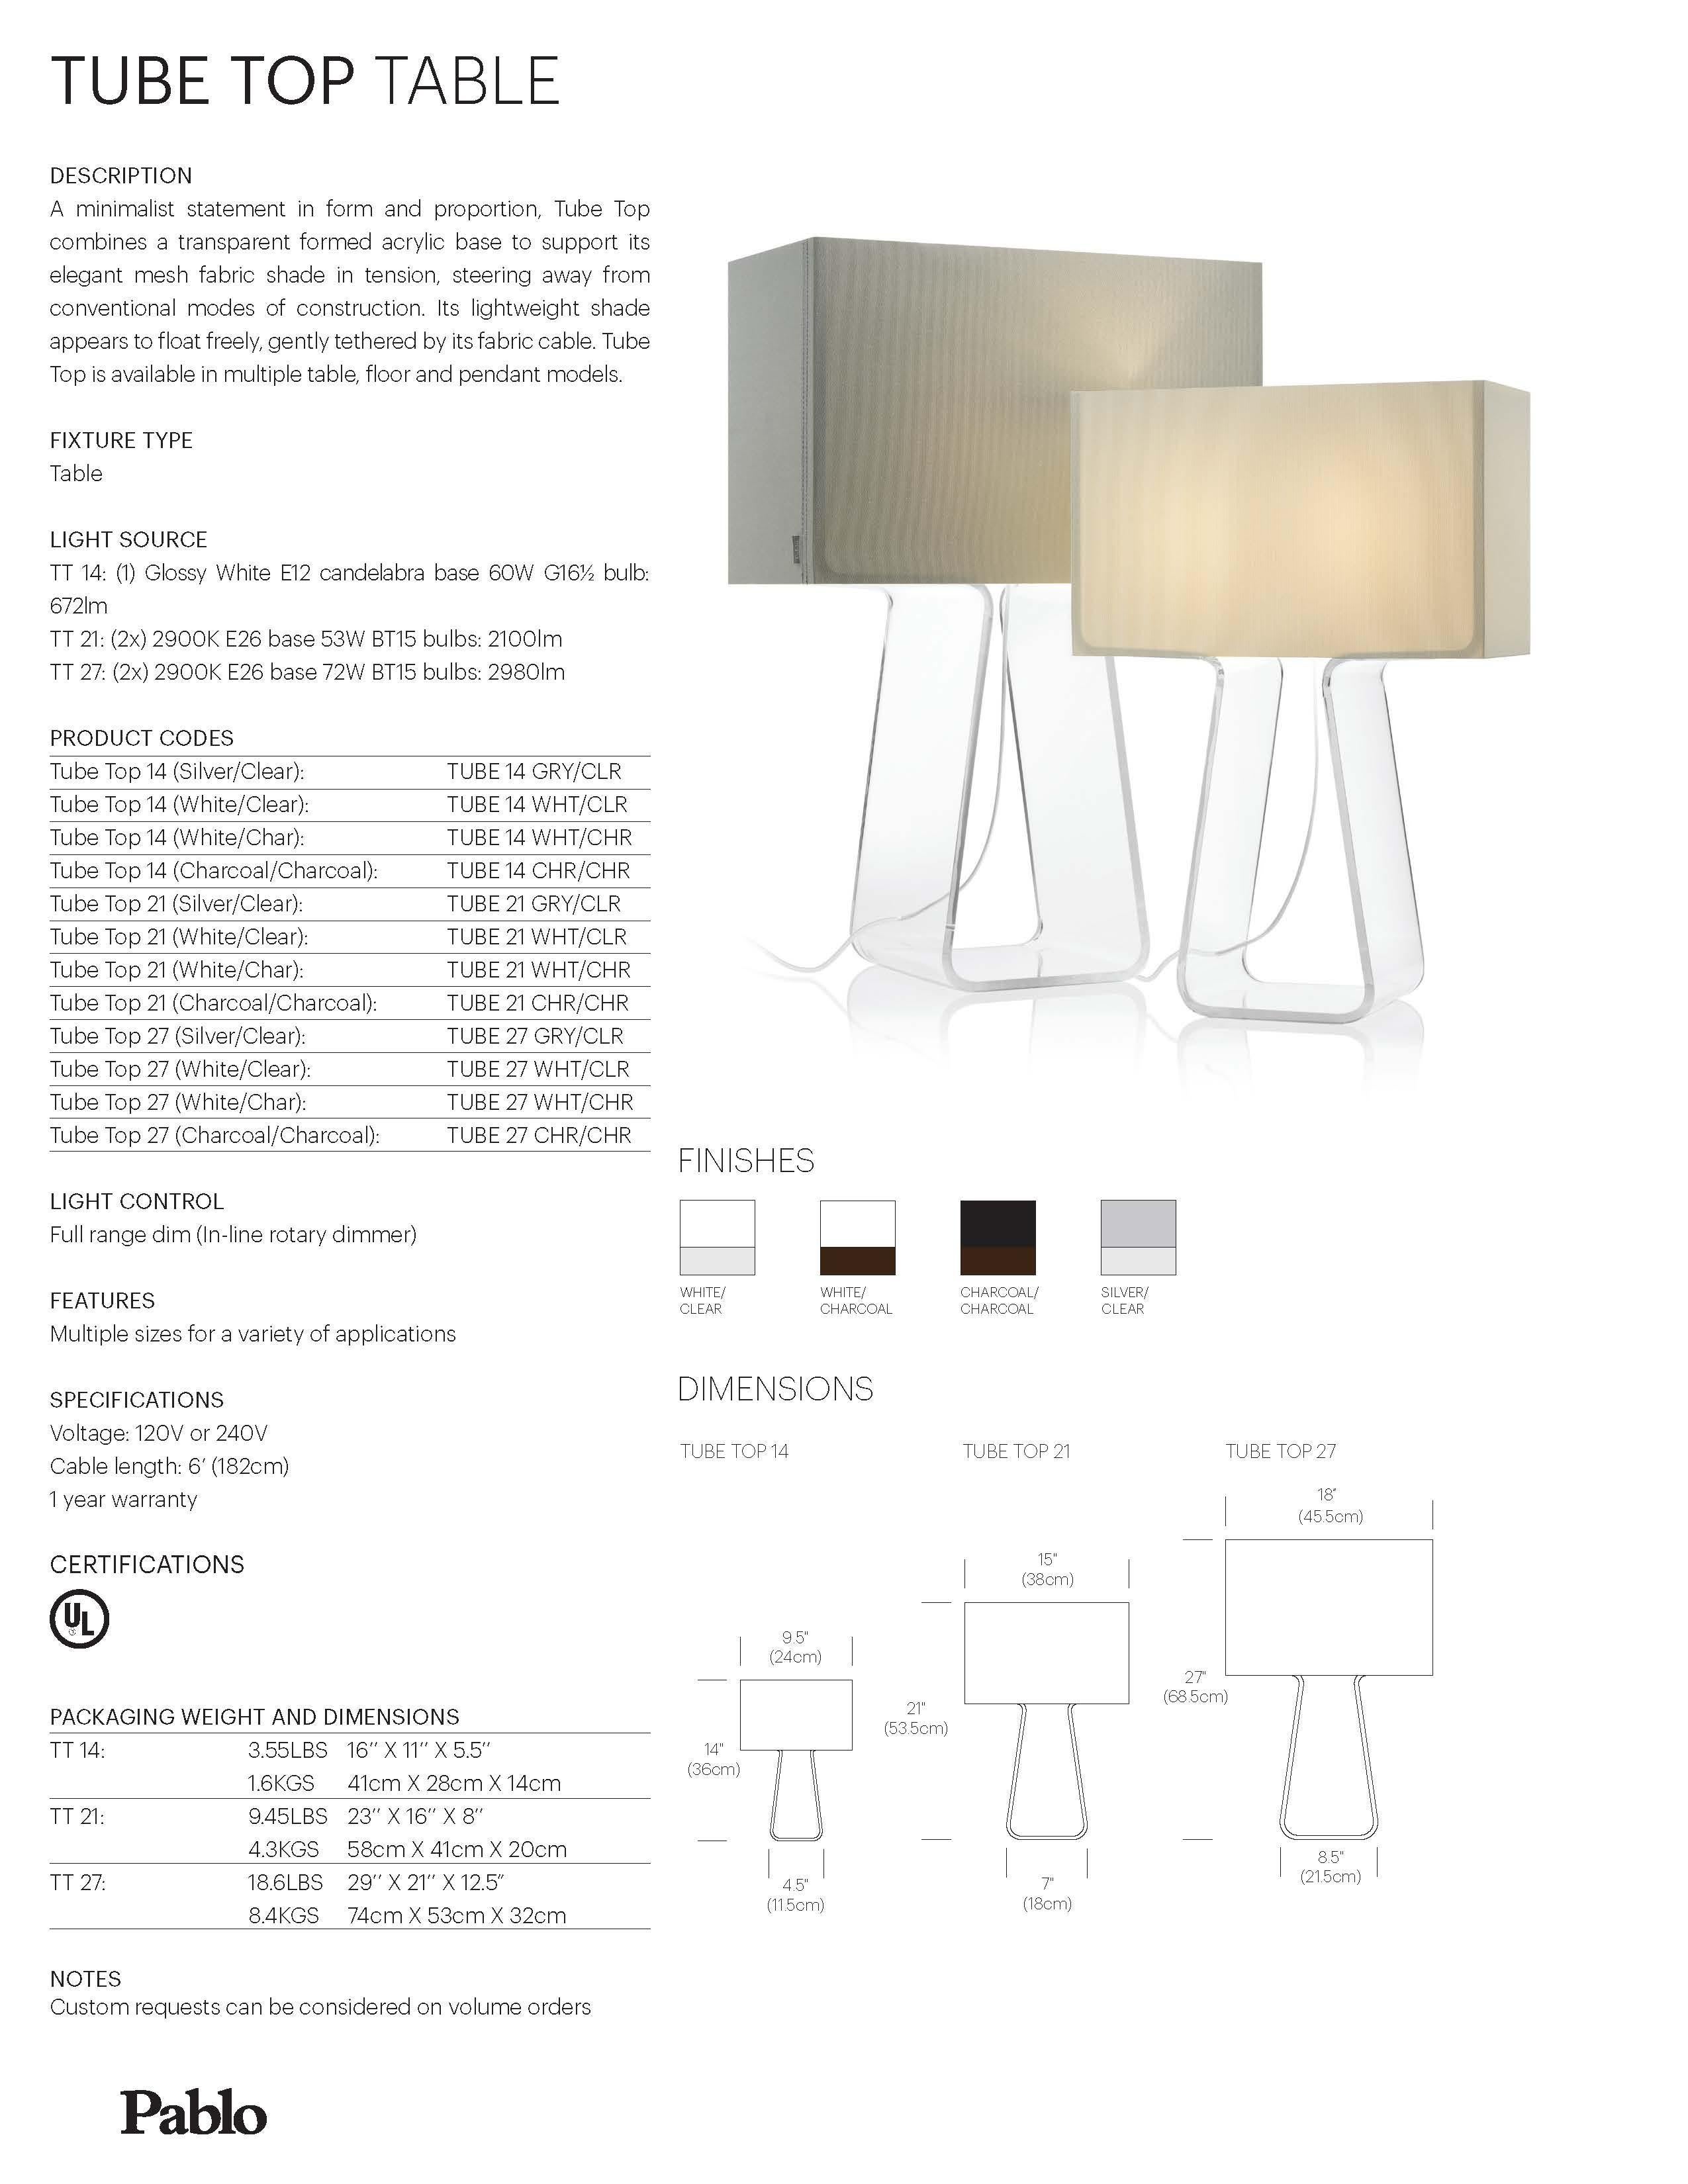 Contemporary Tubetop 21 Table Lamp in White and Clear by Pablo Designs For Sale